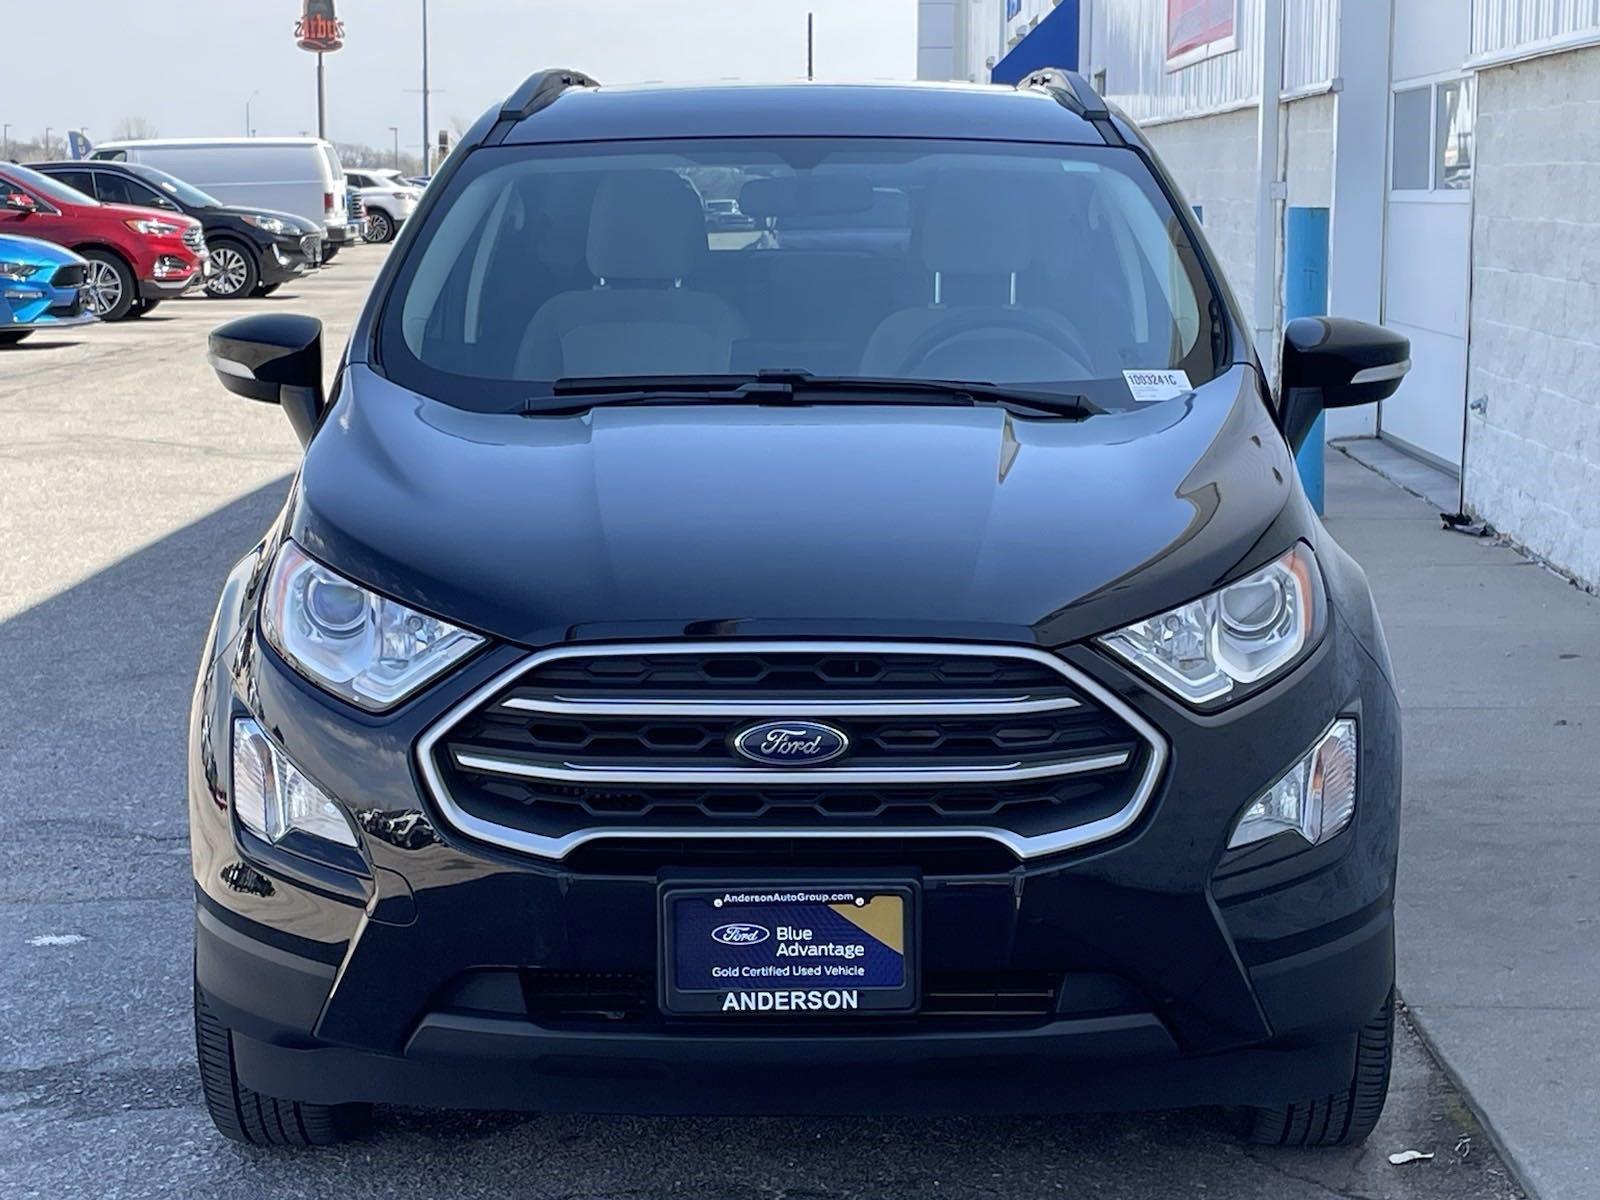 Used 2021 Ford EcoSport SE Sport Utility for sale in Lincoln NE